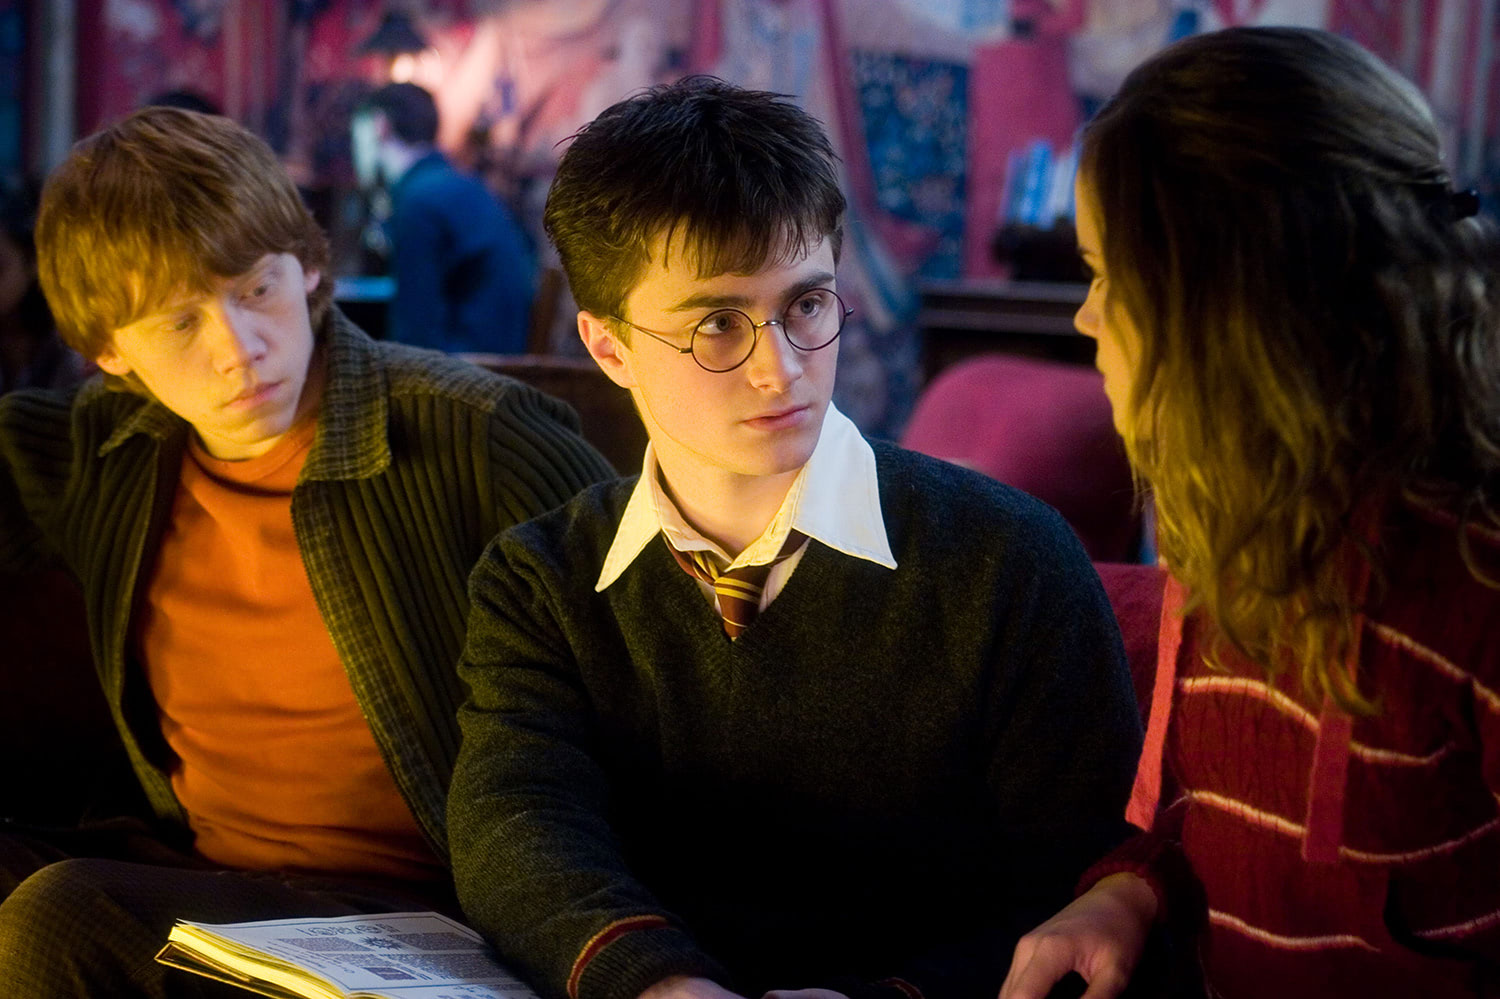 Ron, Harry and Hermione in the Gryffindor Common Room